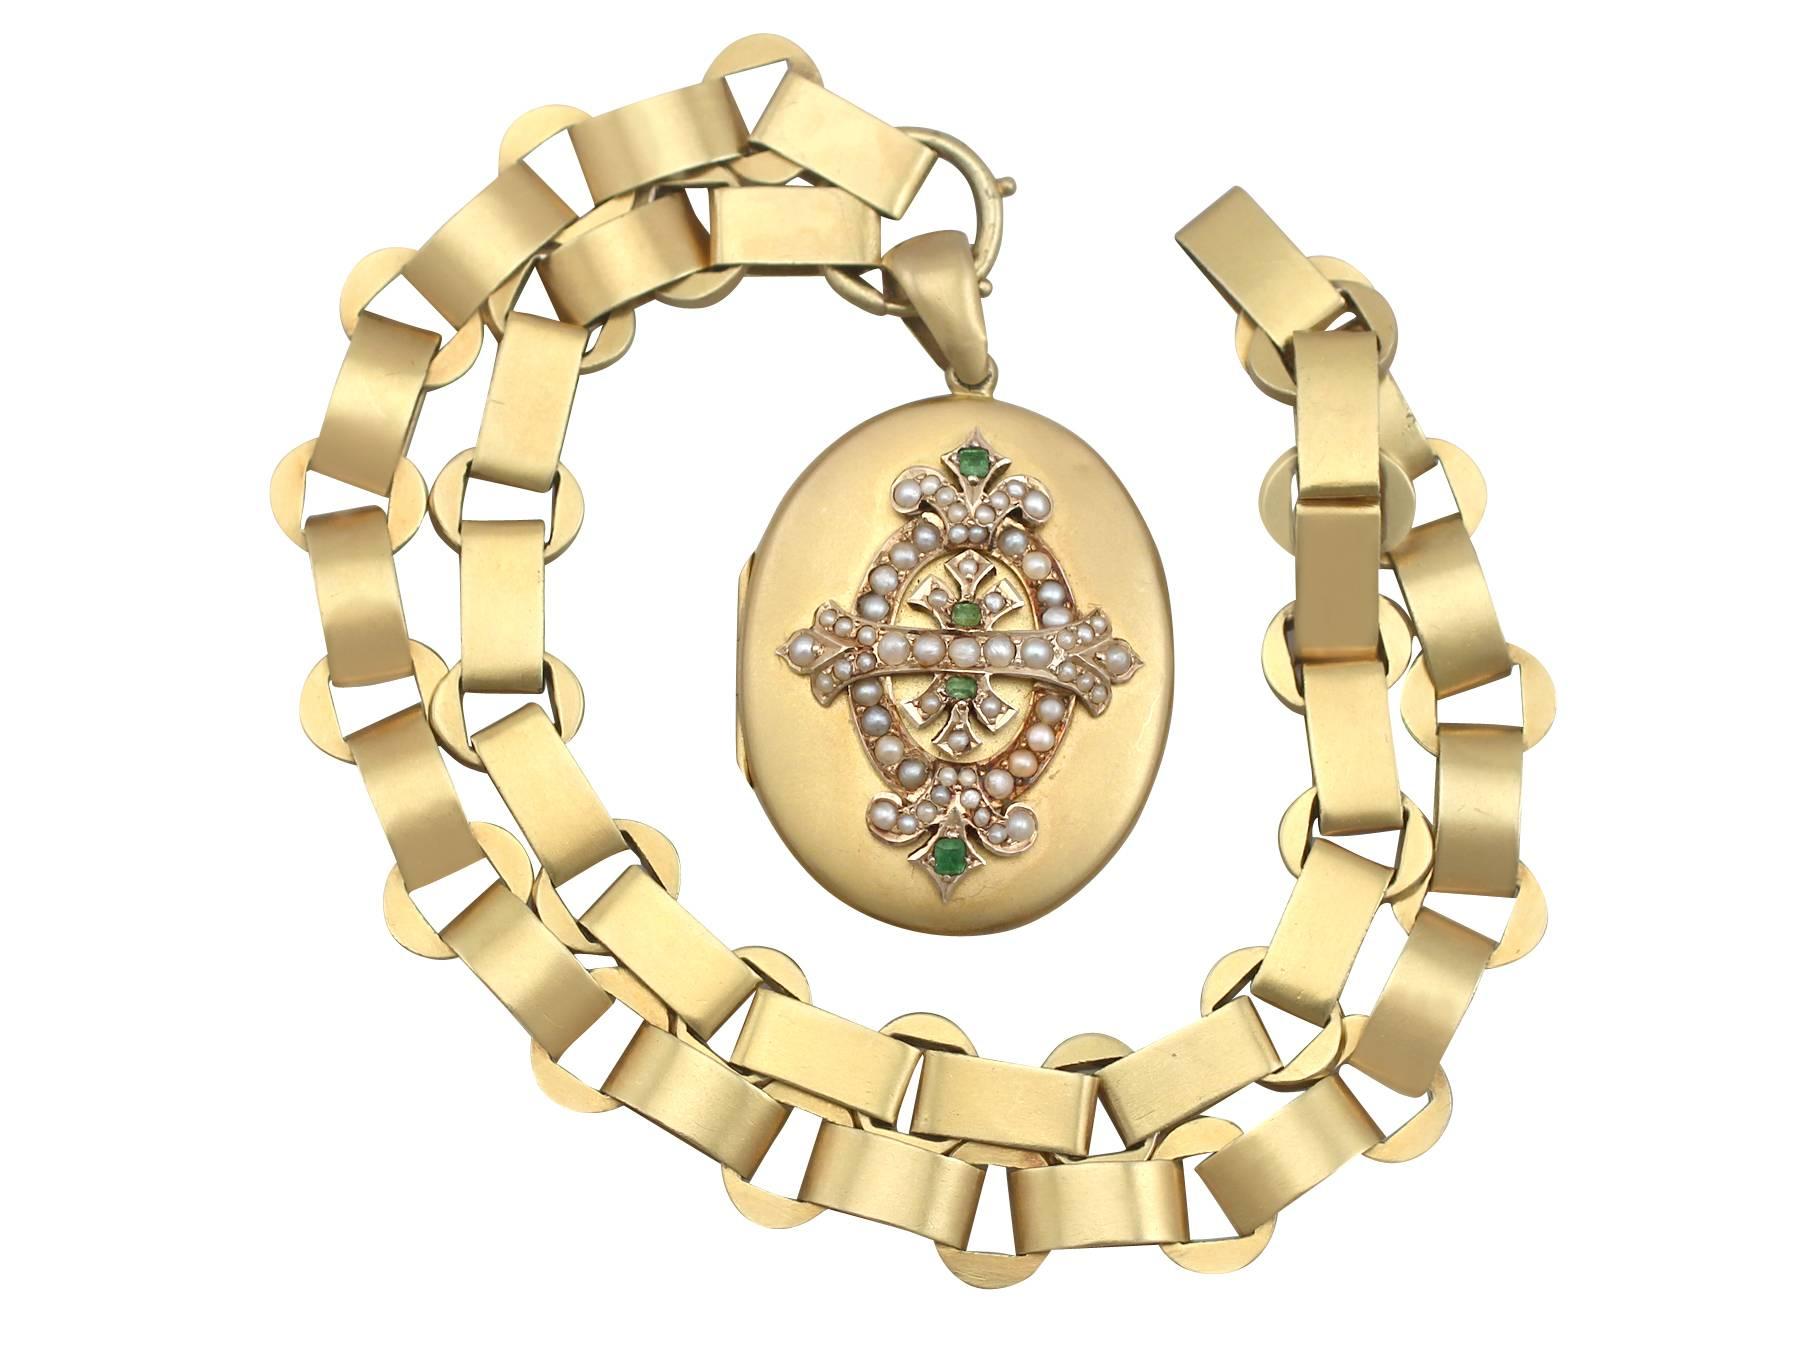 An exceptional Victorian 0.15 carat emerald and seed pearl, 15 karat yellow gold locket and chain; part of our diverse antique jewelry and estate jewelry collections.

This exceptional, fine and impressive Victorian locket and chain has been crafted